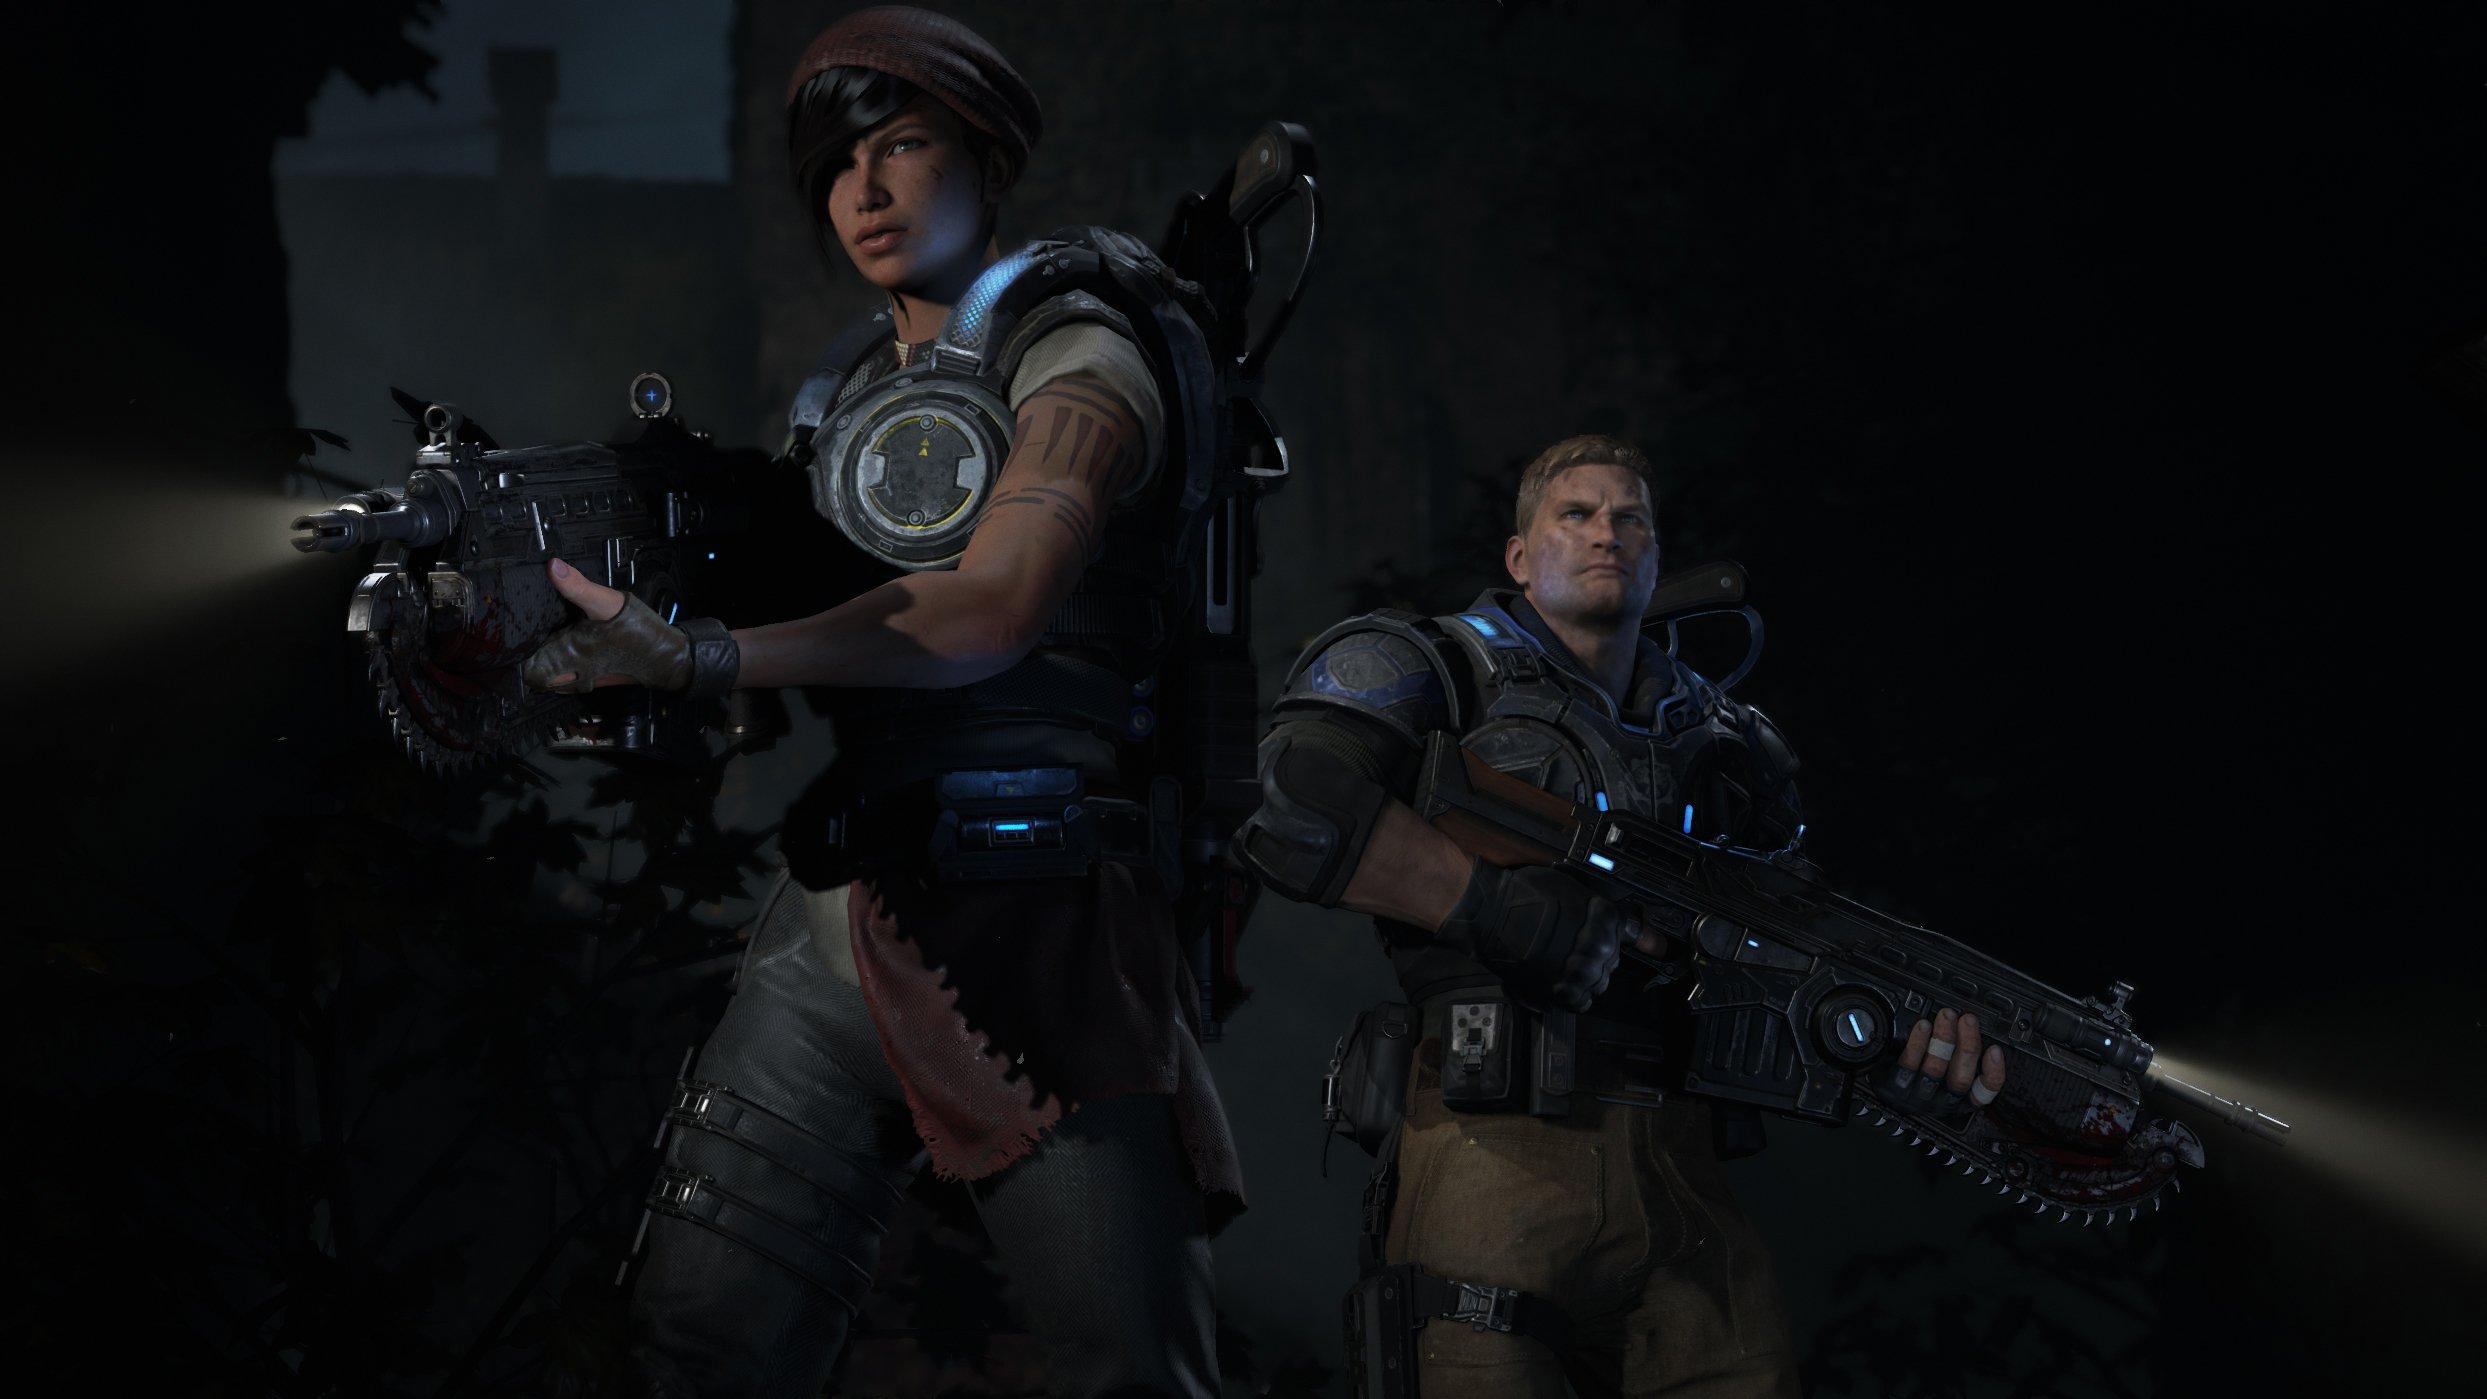 Gears of War 4 PC and Xbox One players will go head-to-head in cross-play  this weekend, and we're expecting to see blood